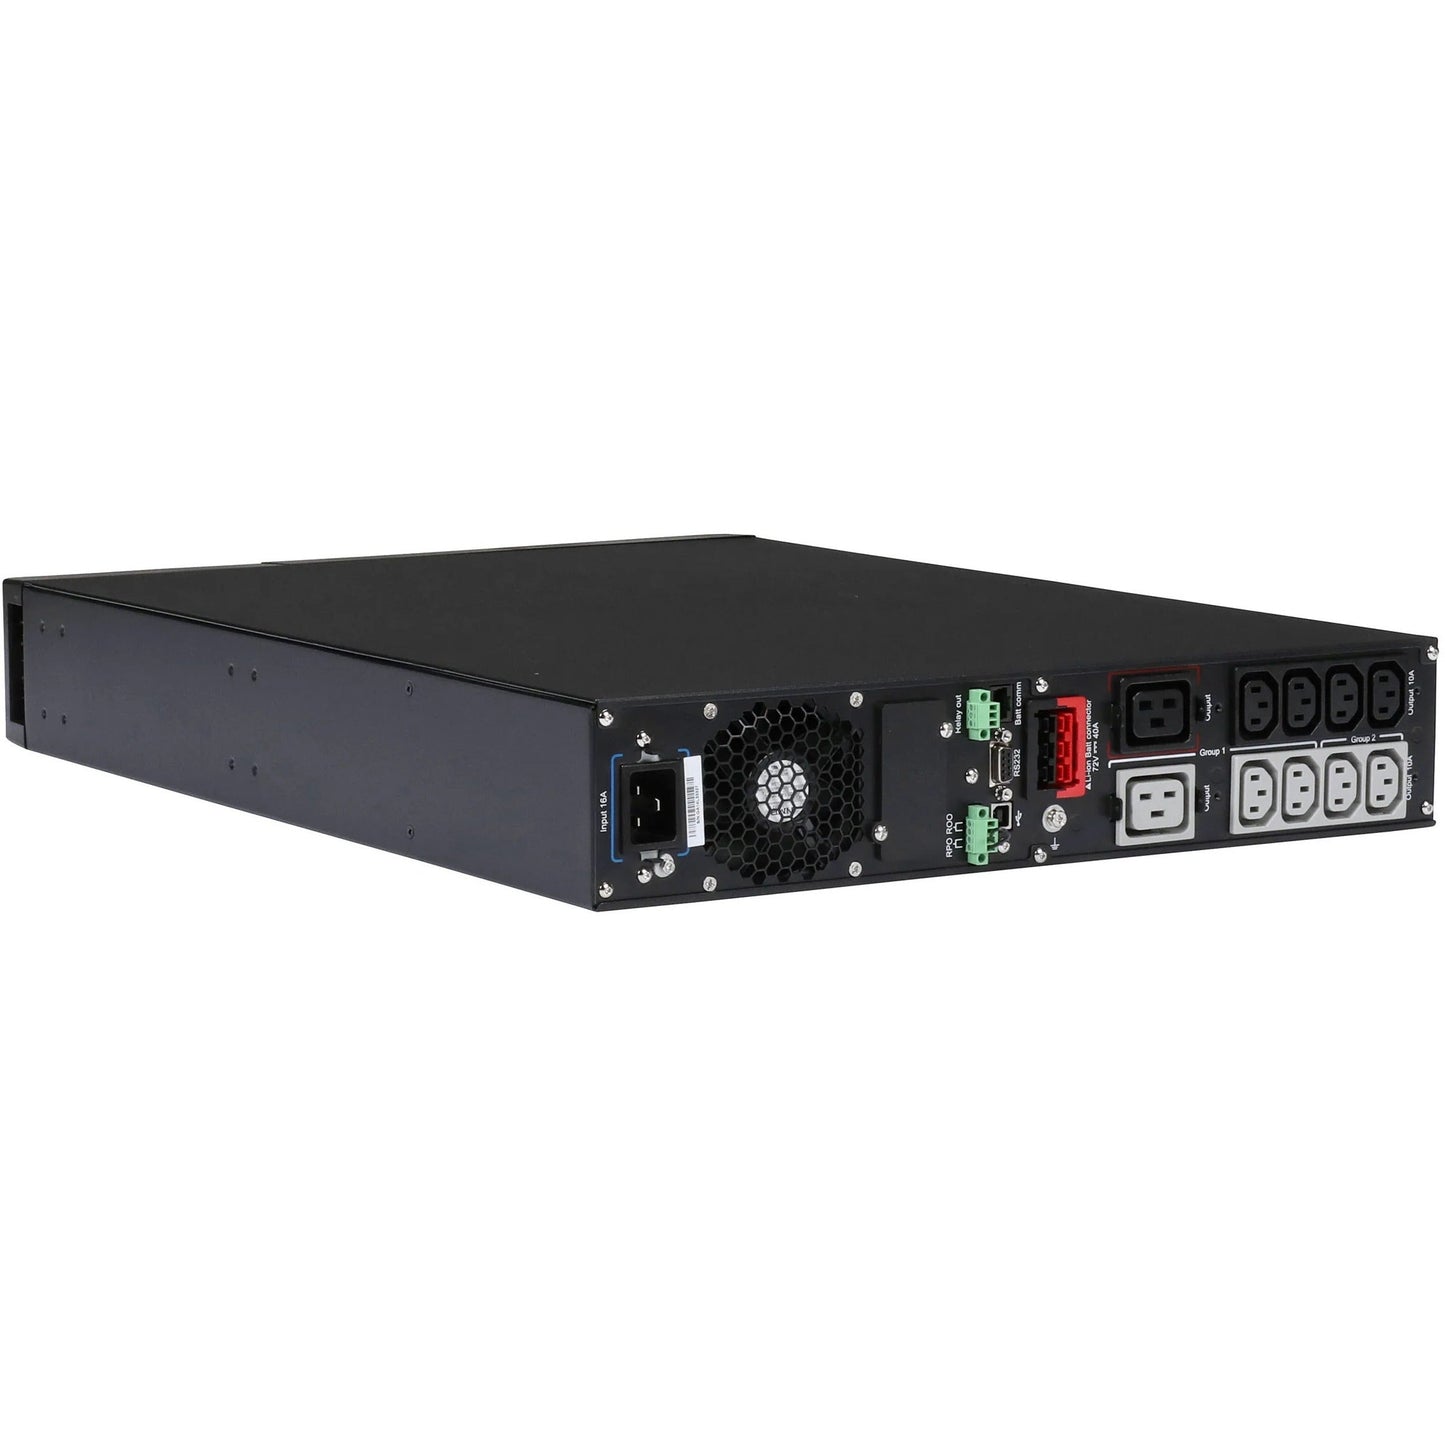 Eaton 9PX 3000VA 2400W 208V Online Double-Conversion UPS - L6-20P 8 C13 2 C19 Outlets Lithium-ion Battery Cybersecure Network Card Option 2U Rack/Tower